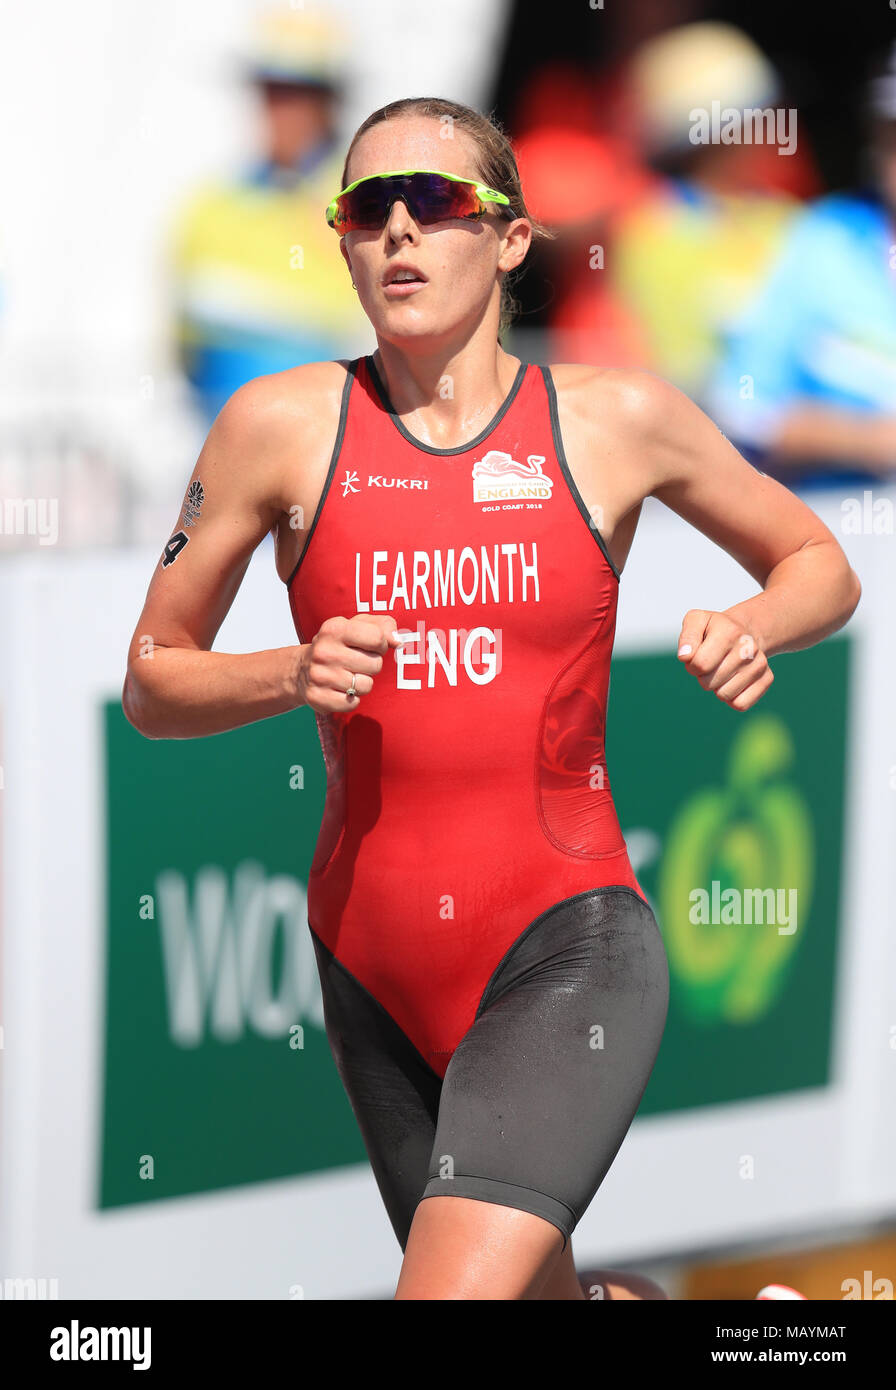 England's Jessica Learmonth competes in the Women's Triathlon Final at the Southport Broadwater Parklands during day one of the 2018 Commonwealth Games in the Gold Coast, Australia. Stock Photo